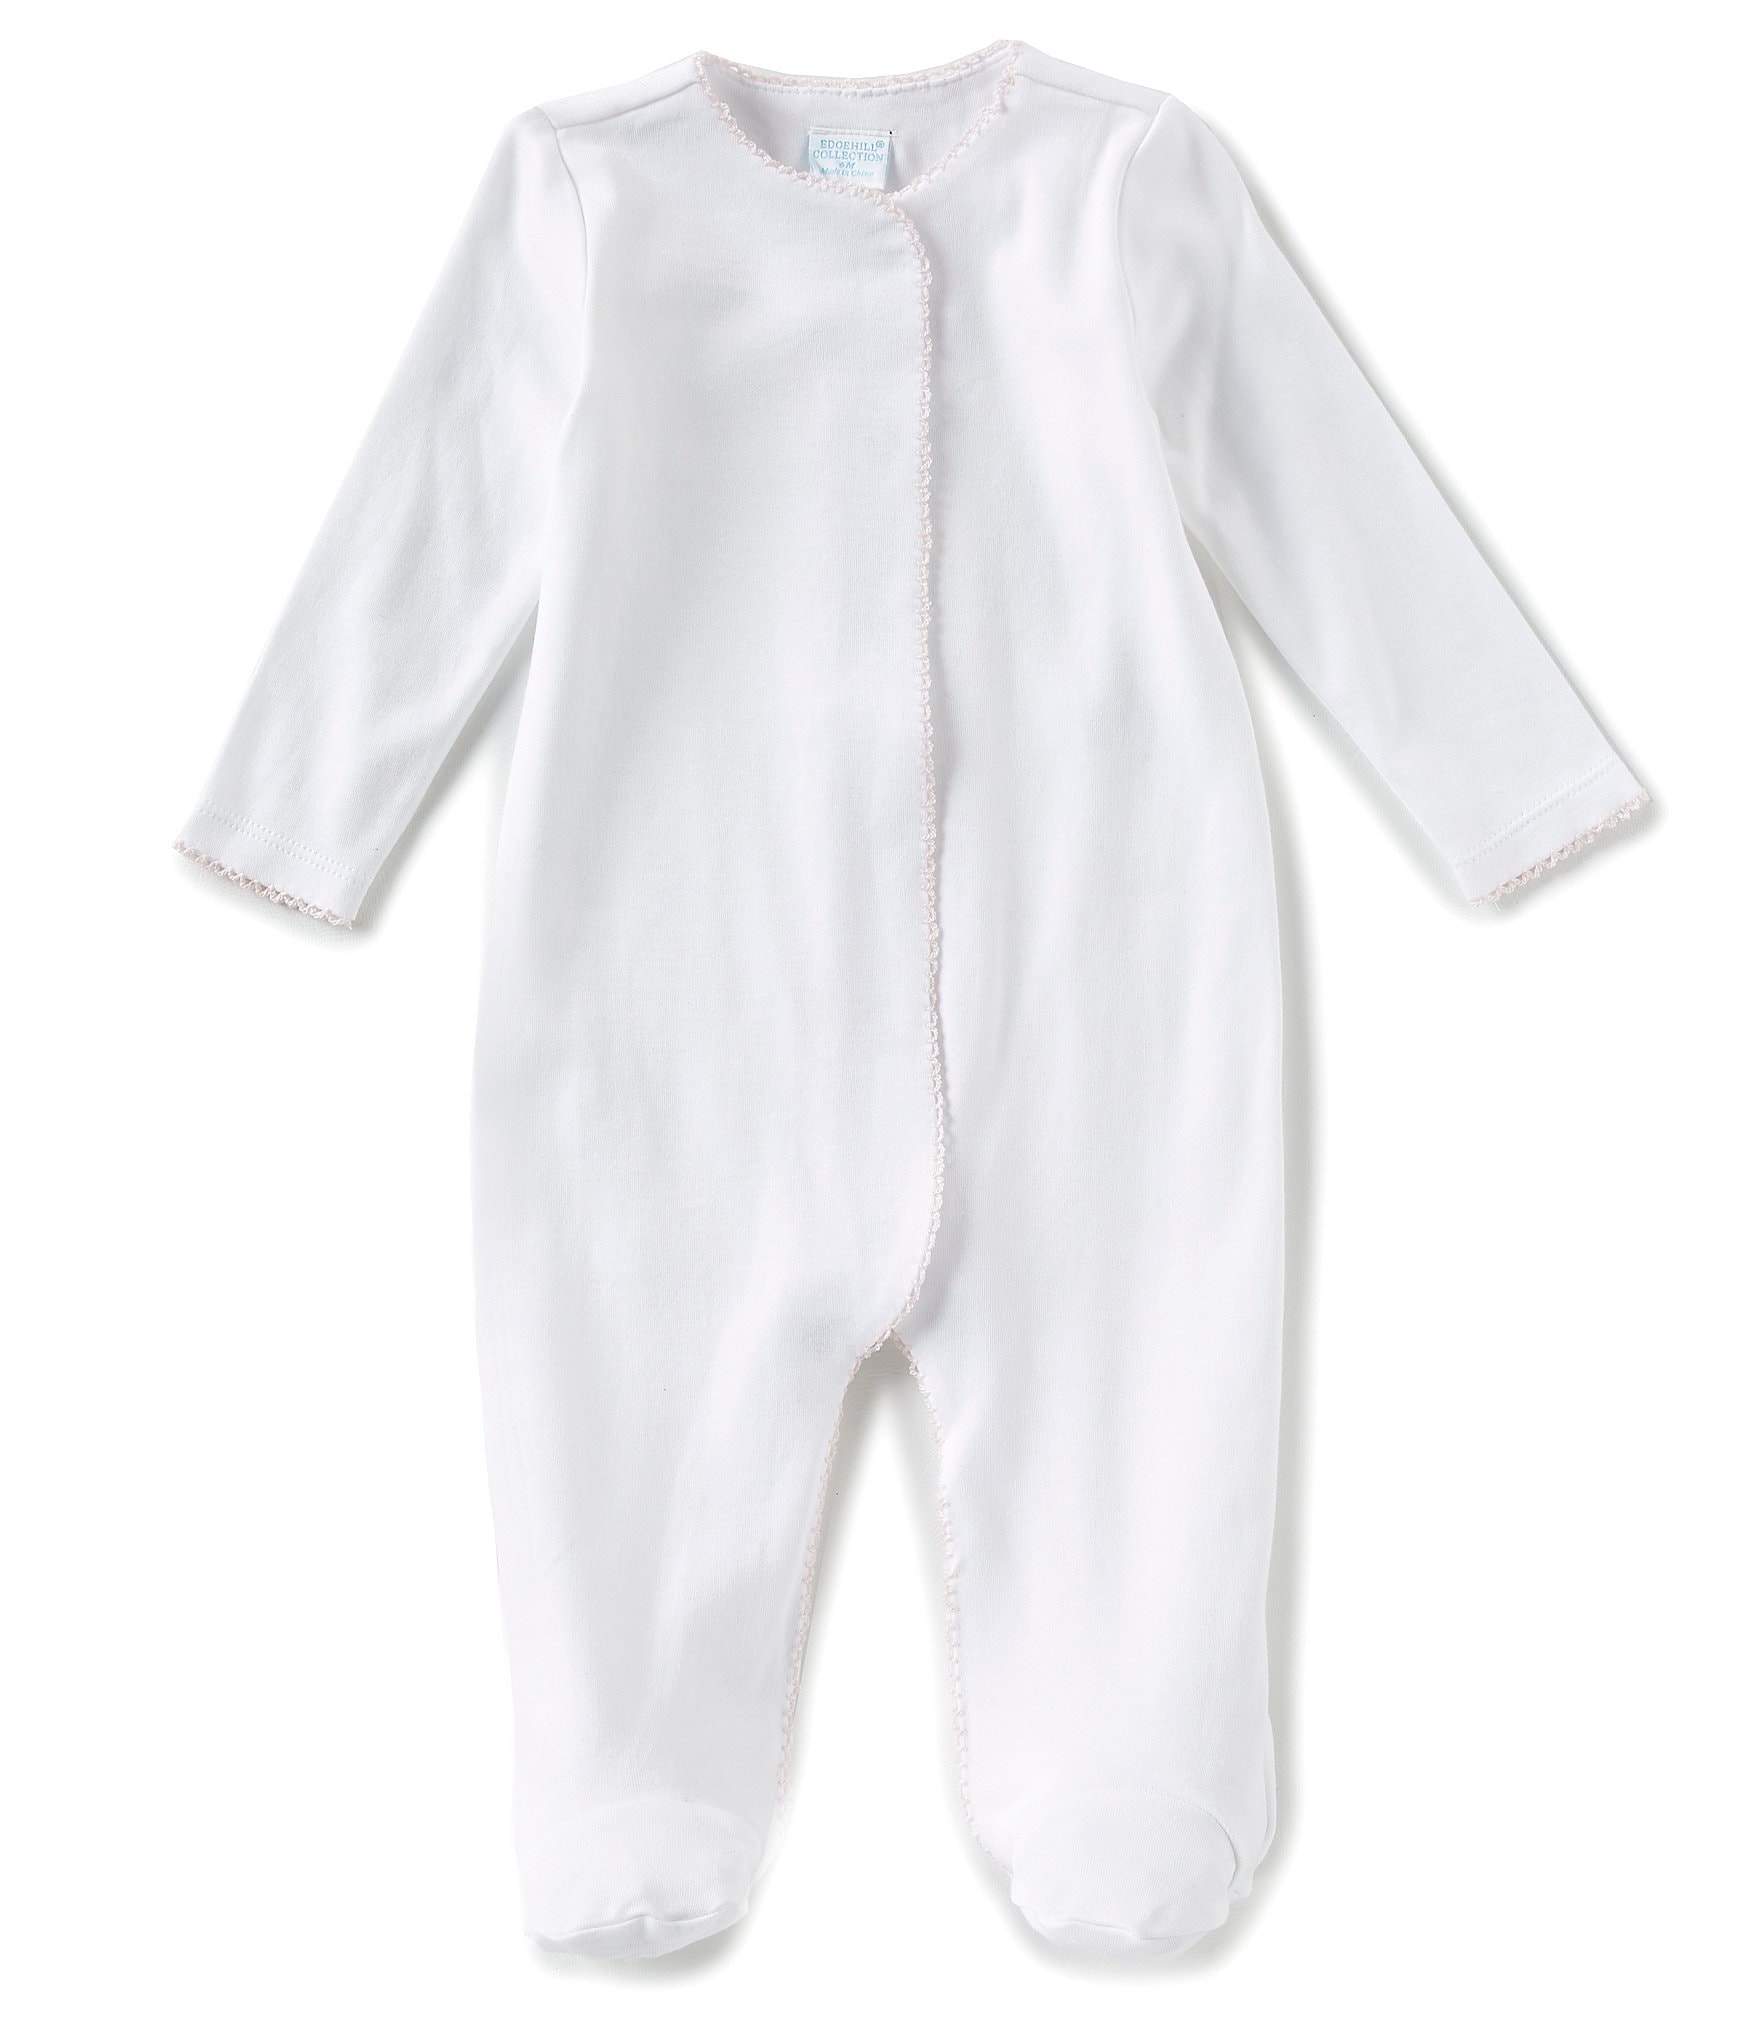 https://dimg.dillards.com/is/image/DillardsZoom/zoom/starting-out-baby-girls-preemie-9-months-supima-monogram-footed-coverall/05584681_zi_white.jpg